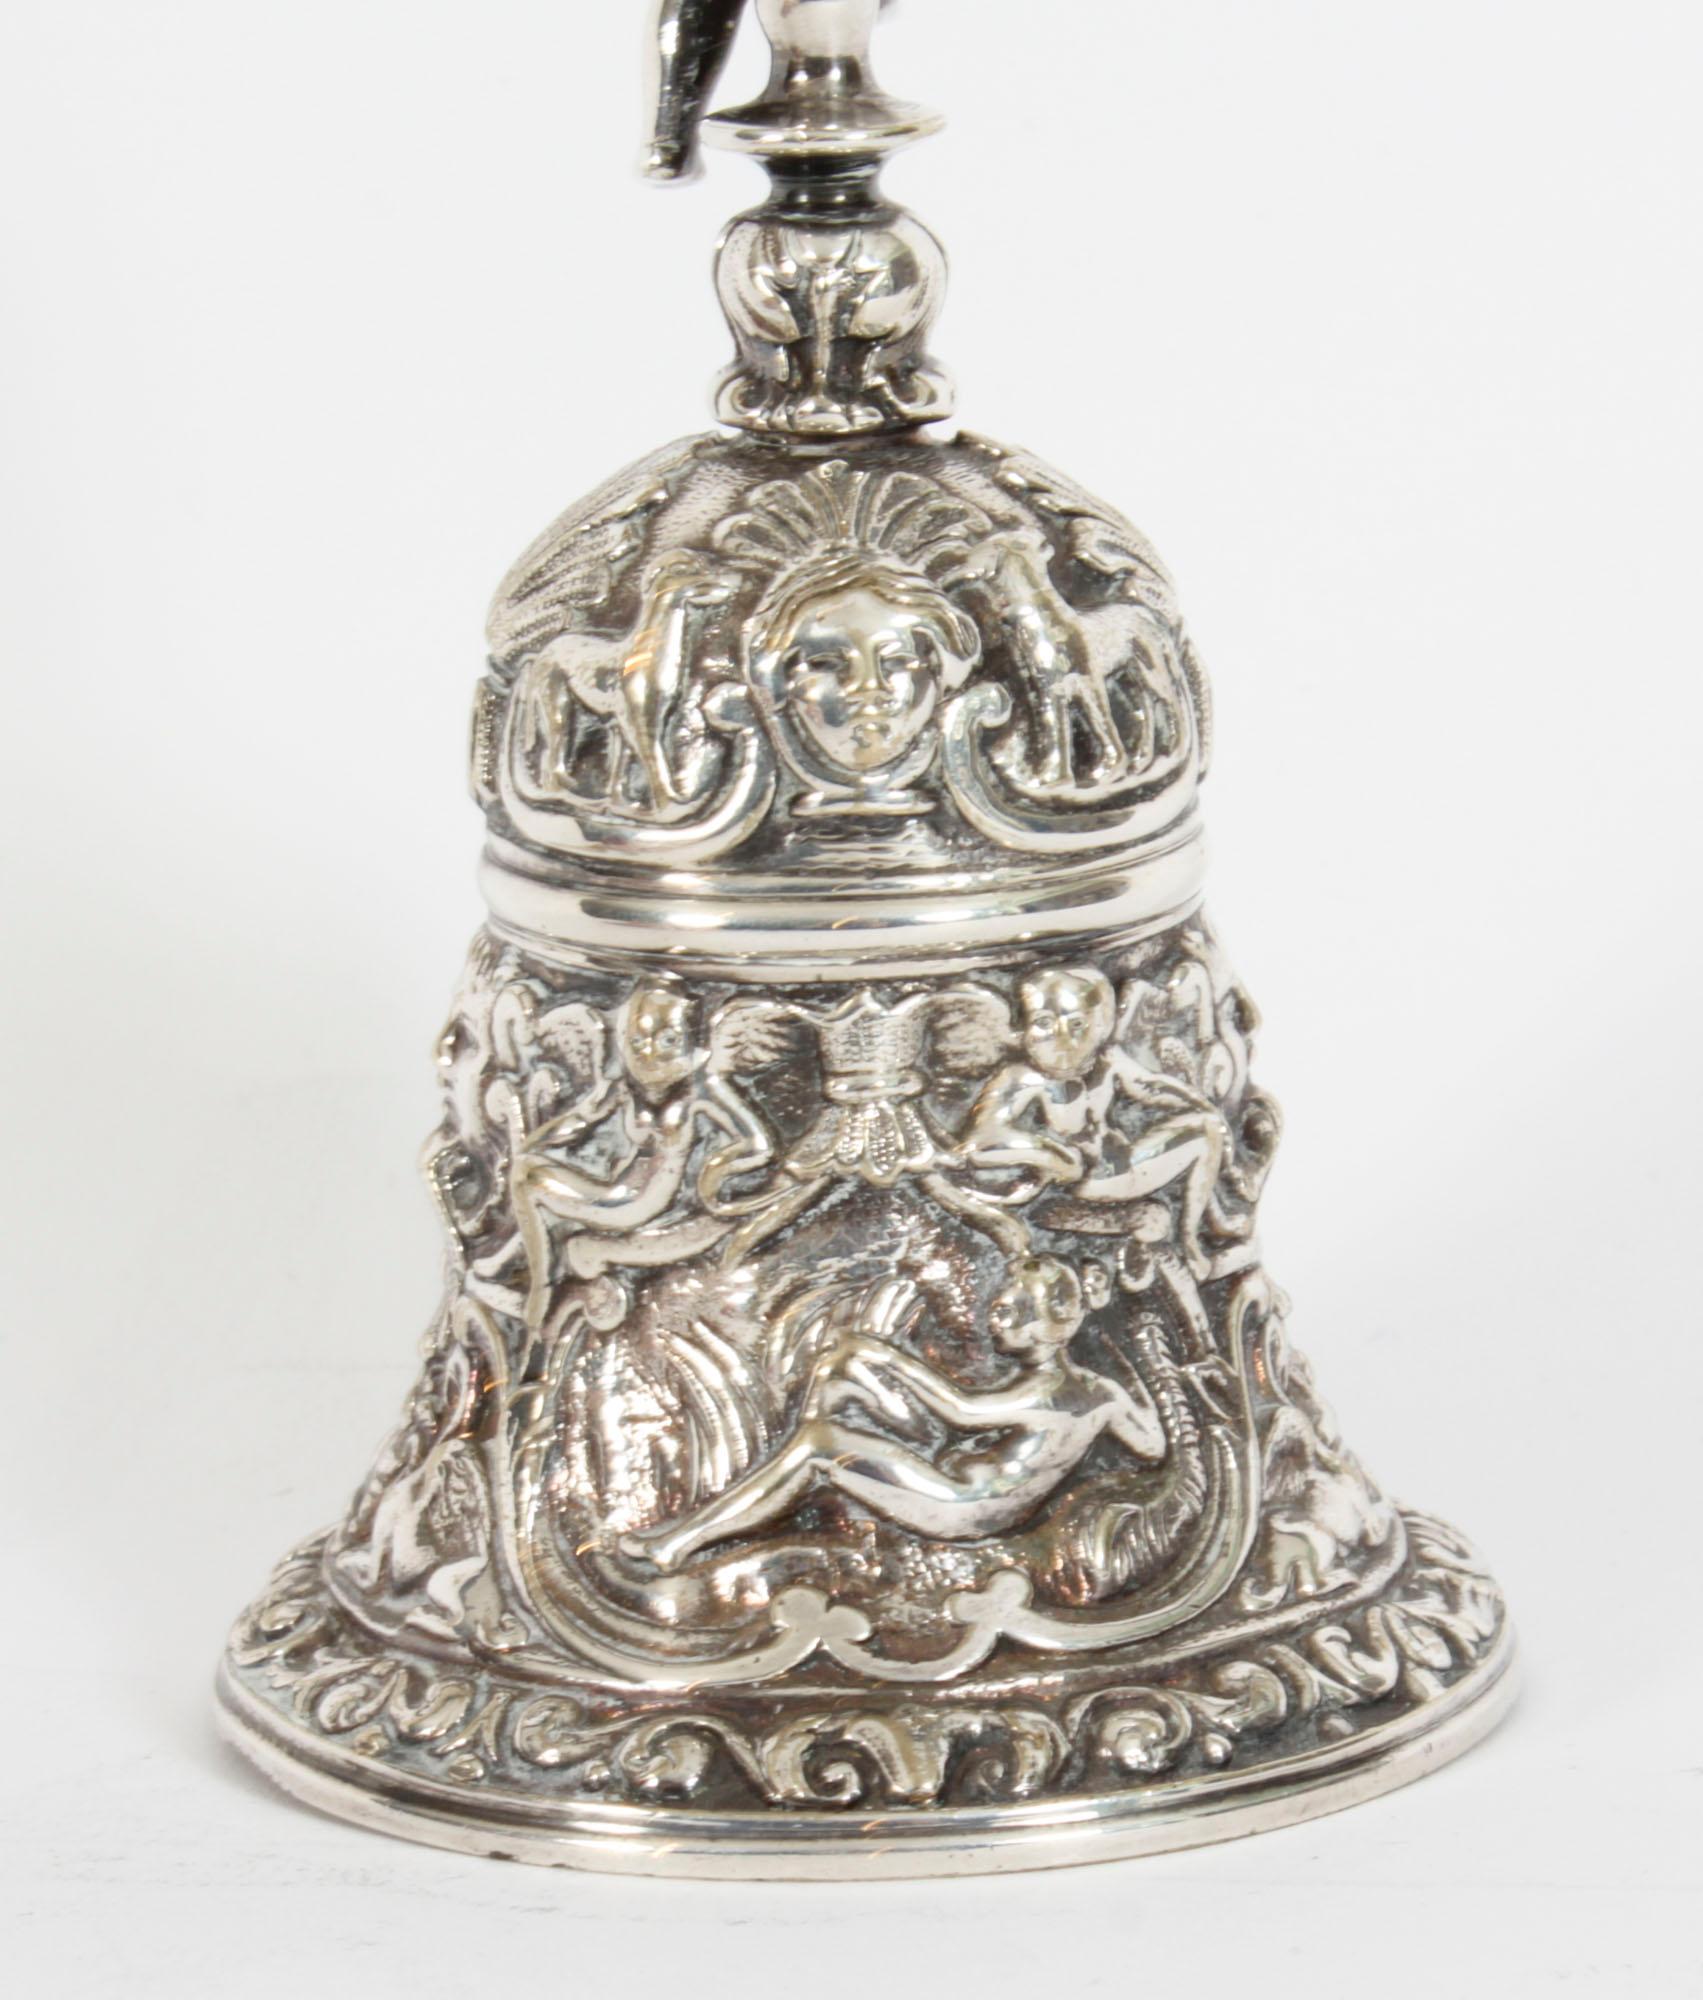 Antique Silver Plated Hand Bell Renaissance Revival 19th Century 9